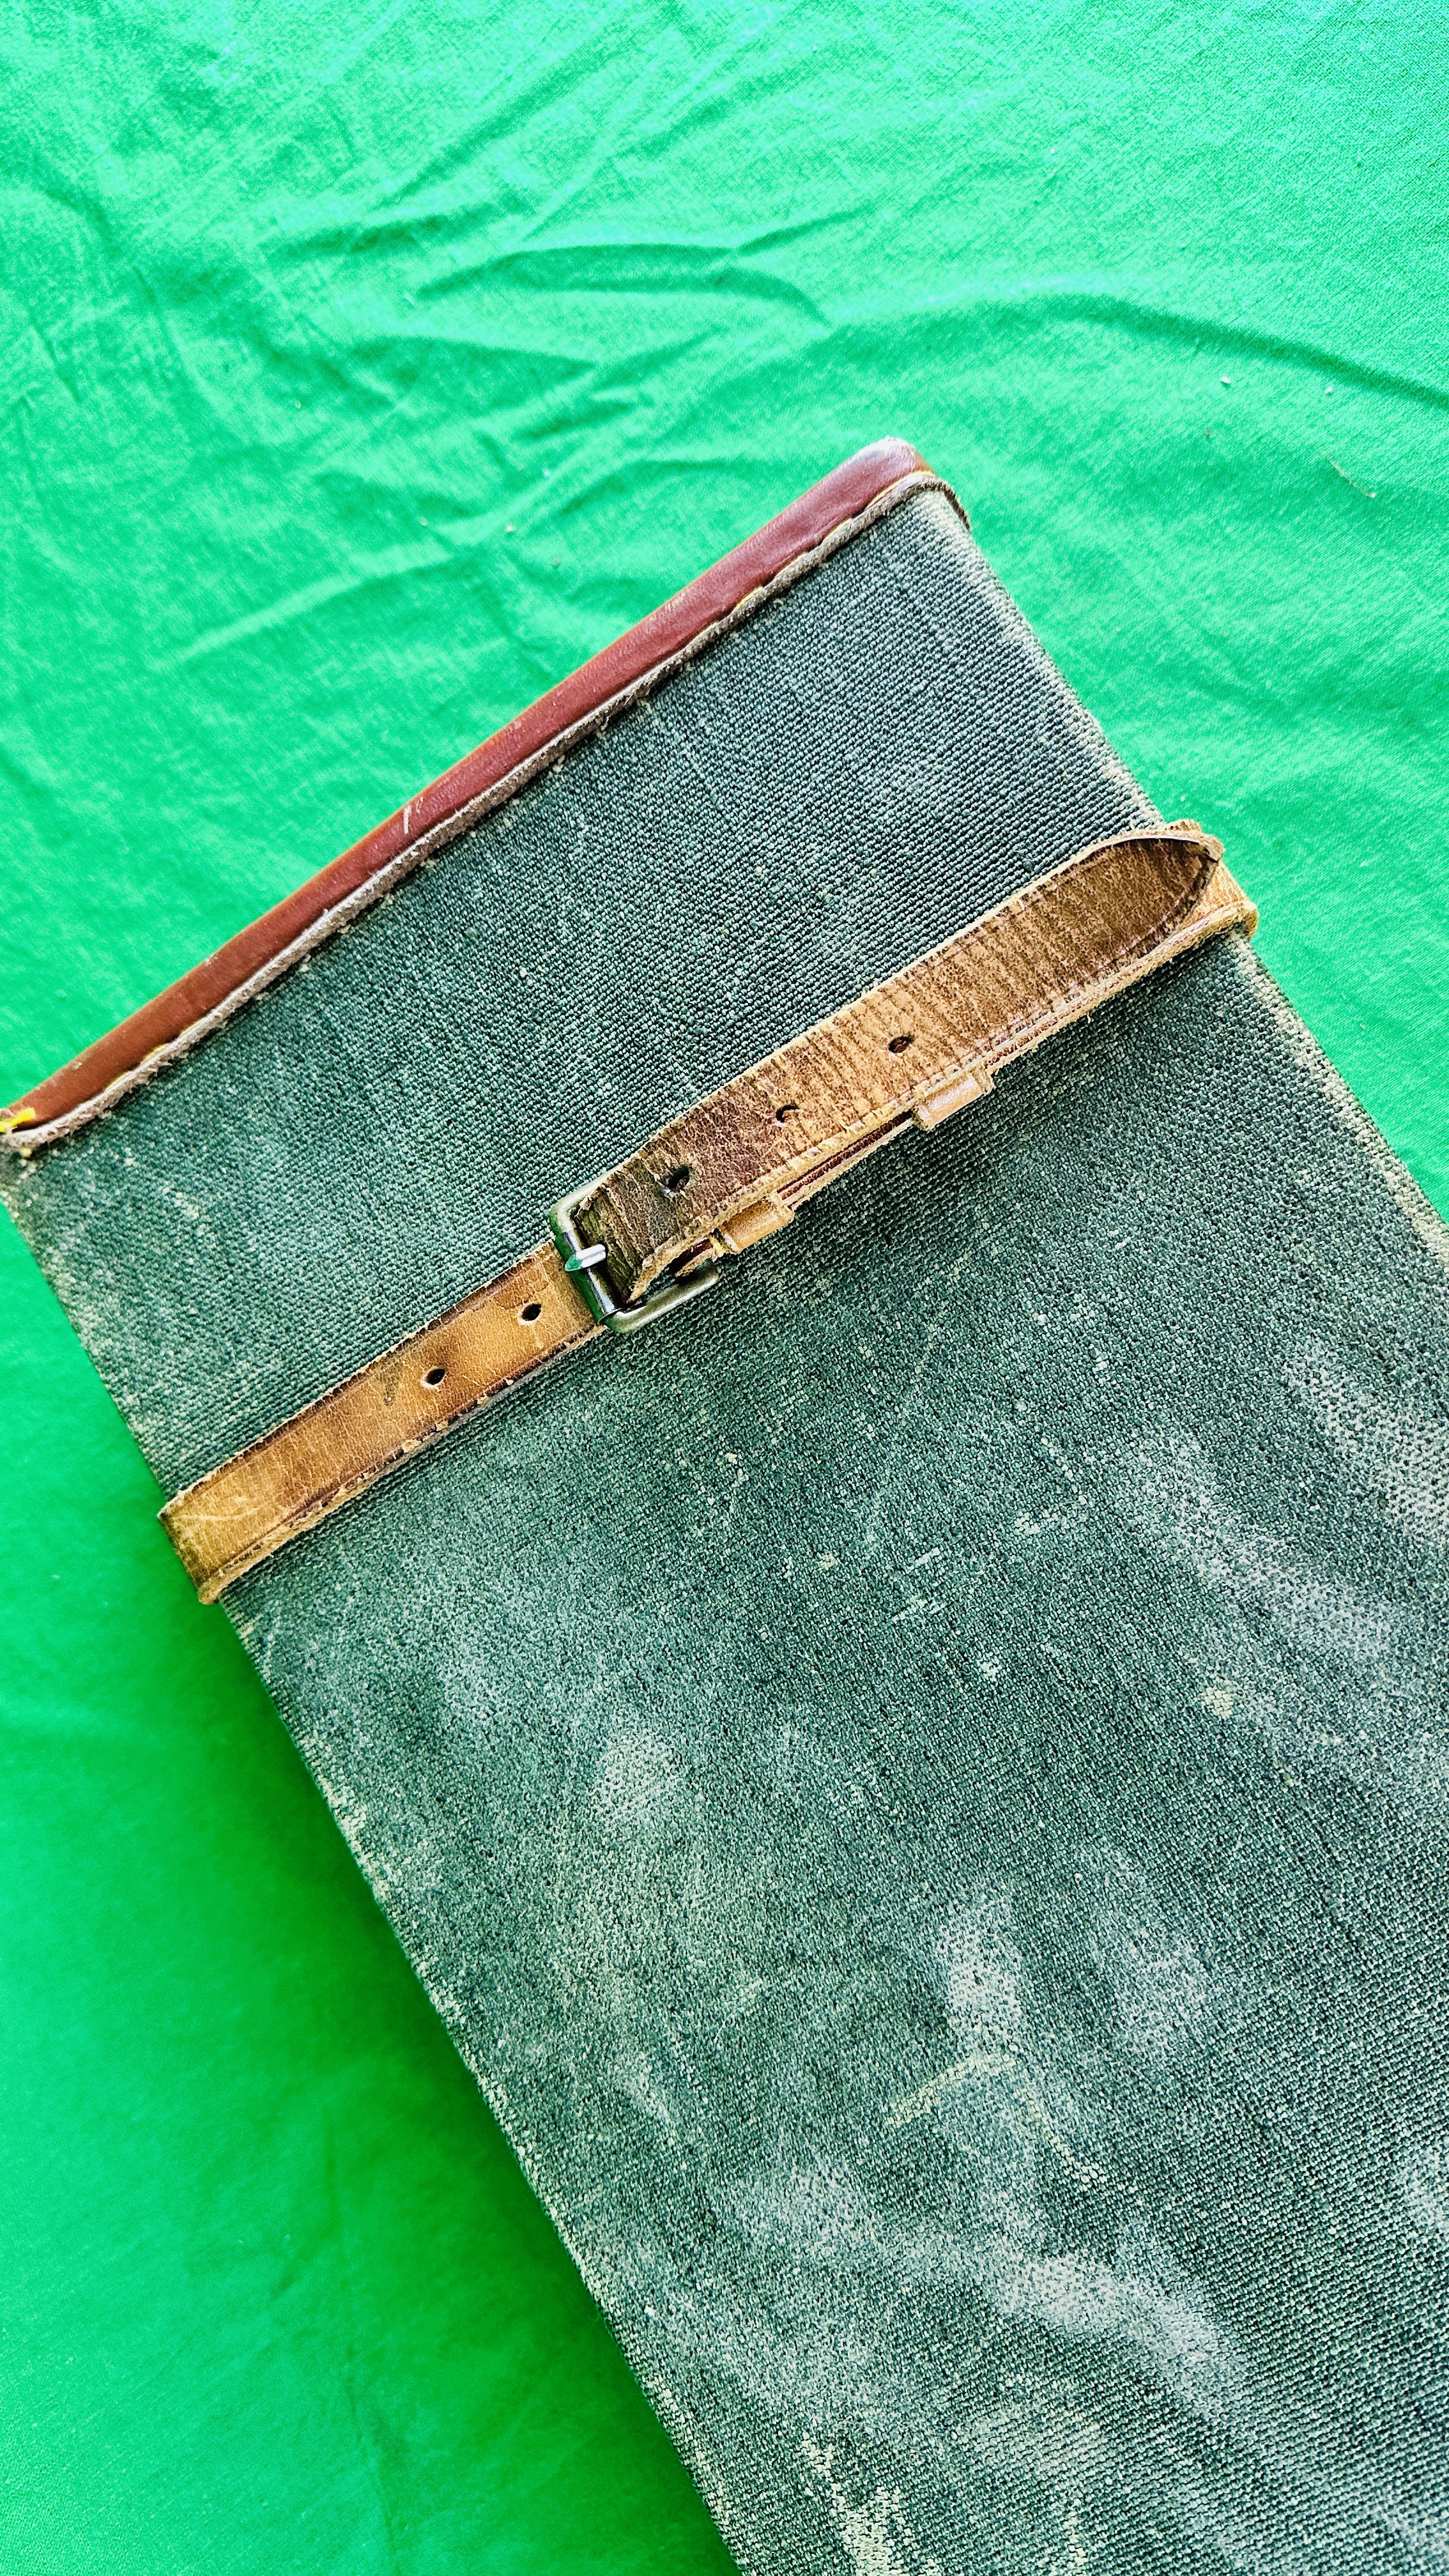 A BRADY LEATHER BOUND CANVAS MOTORING CASE PLUS CONTENTS TO INCLUDE CLEANING RODS, BARREL LOCKS, - Image 2 of 11